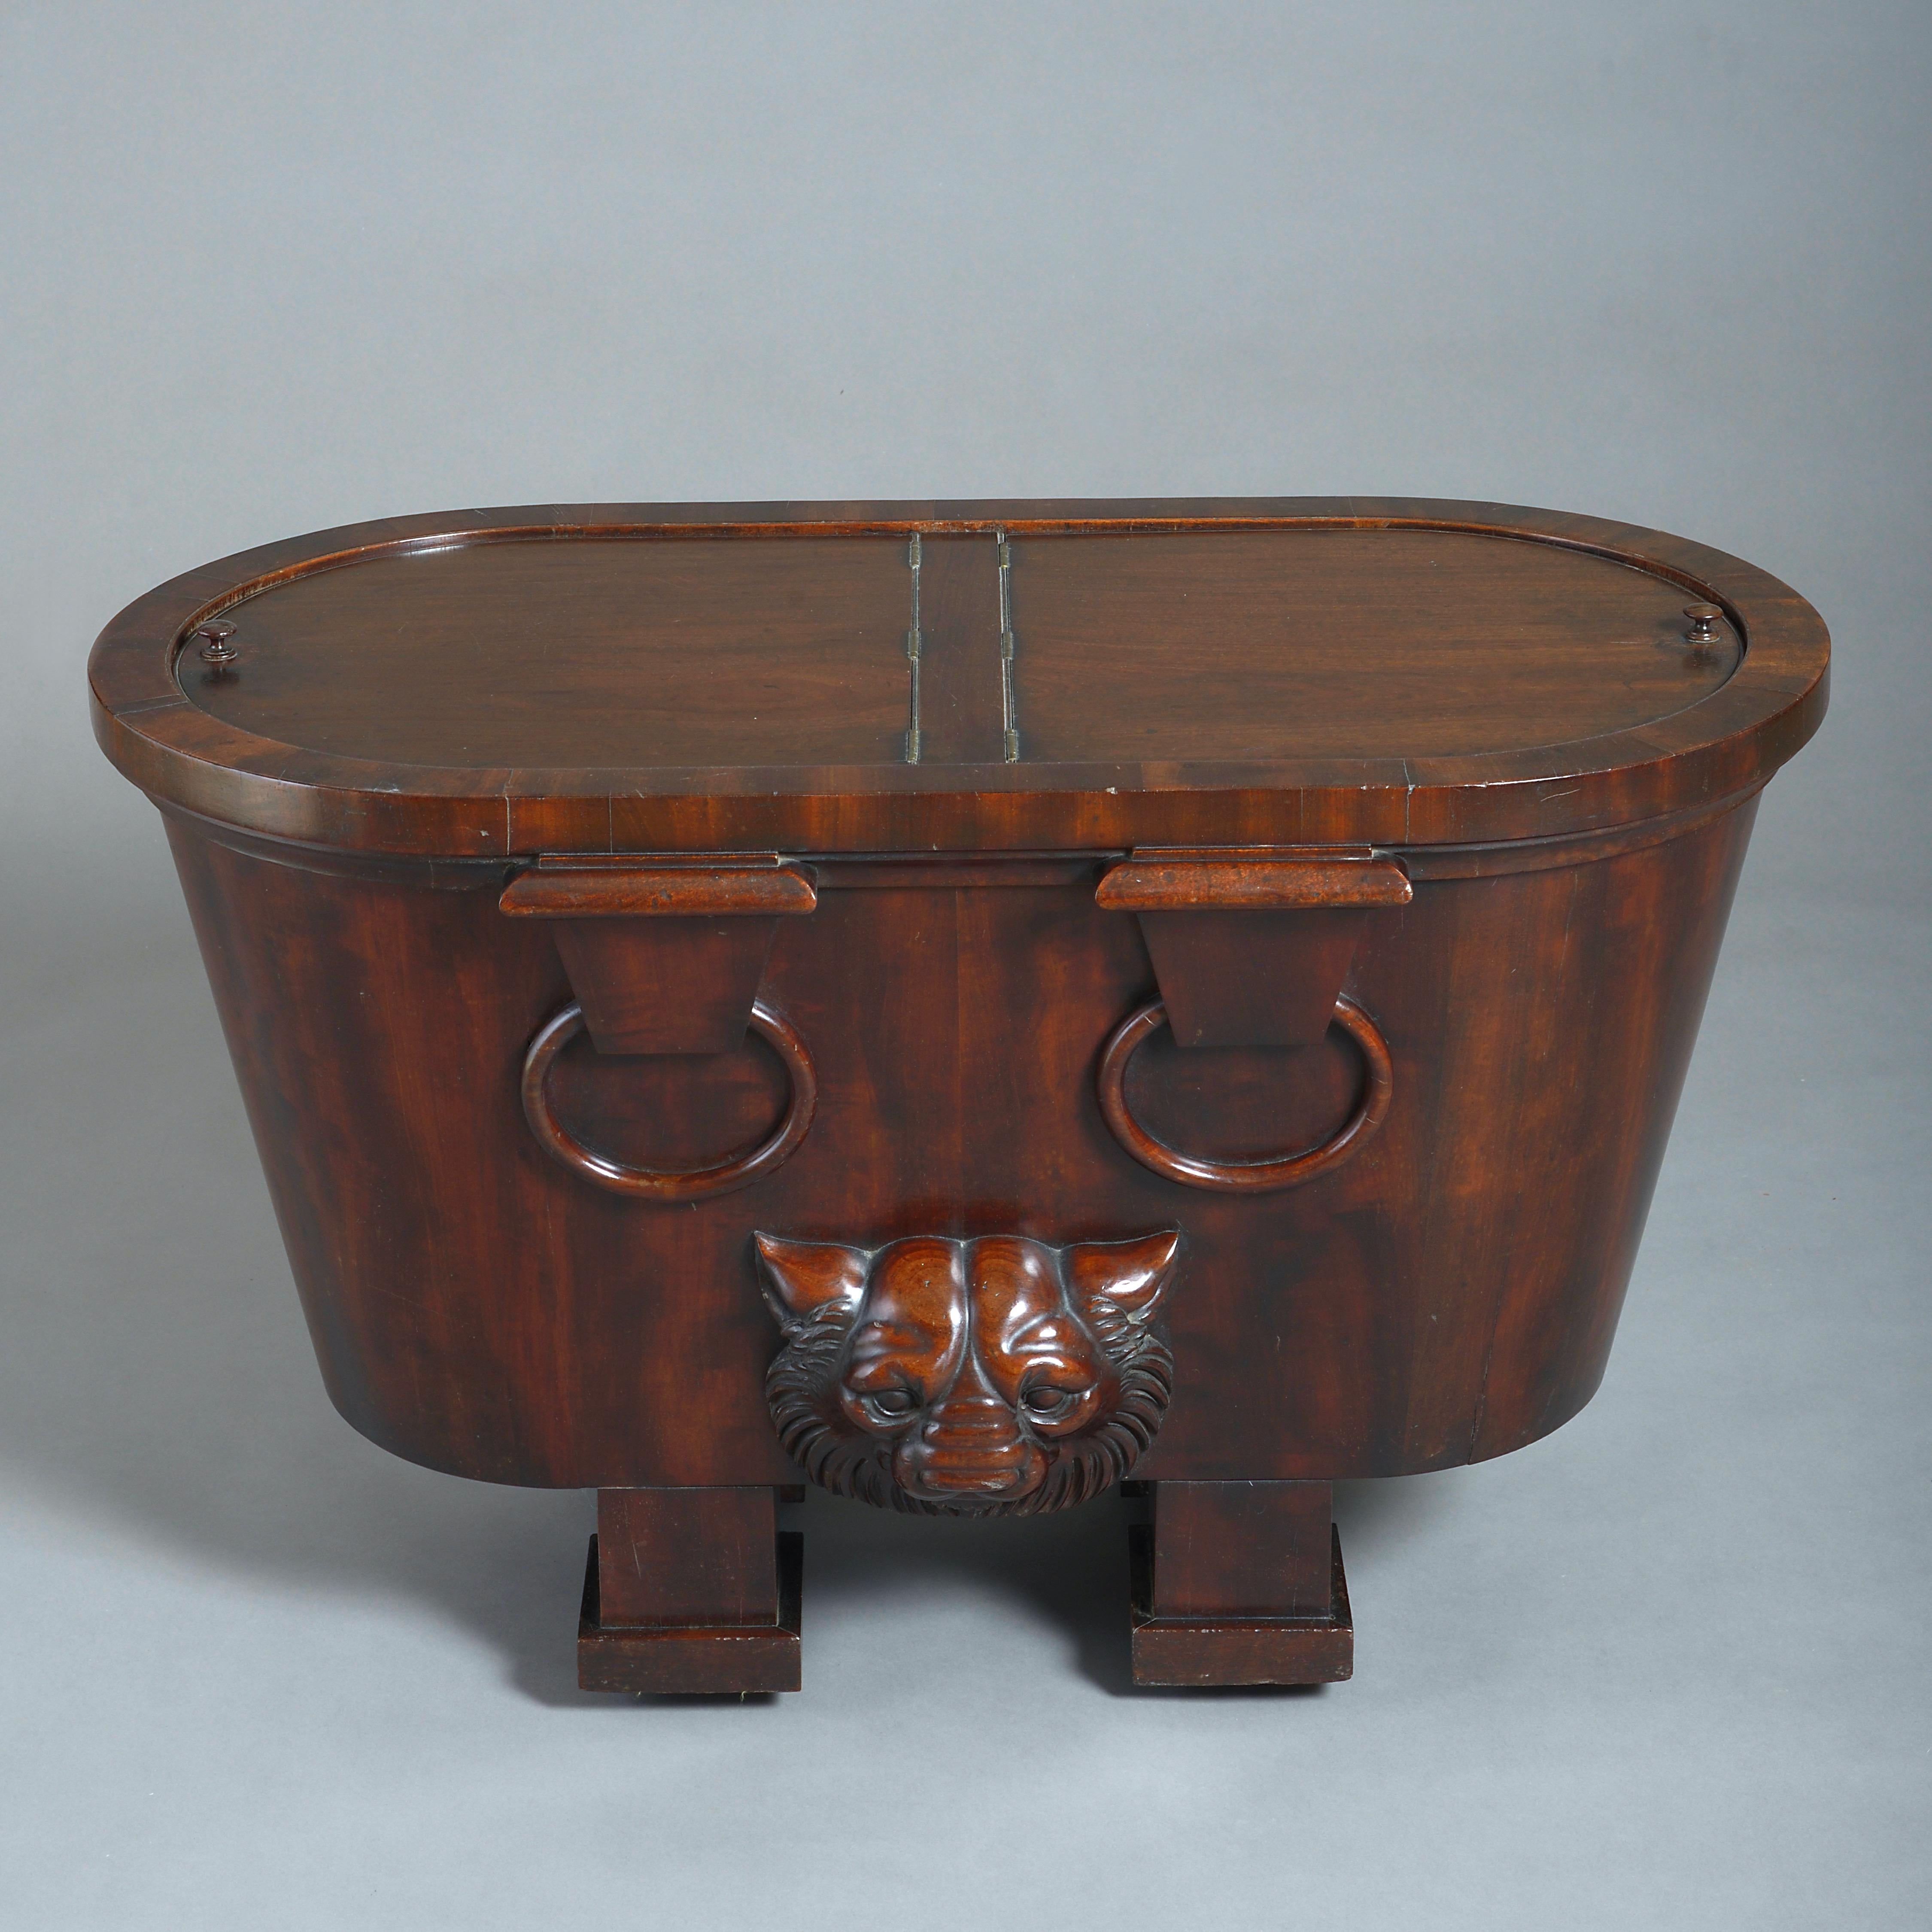 Regency Mahogany Wine-Cooler after a design by Thomas Hope In Good Condition For Sale In London, GB